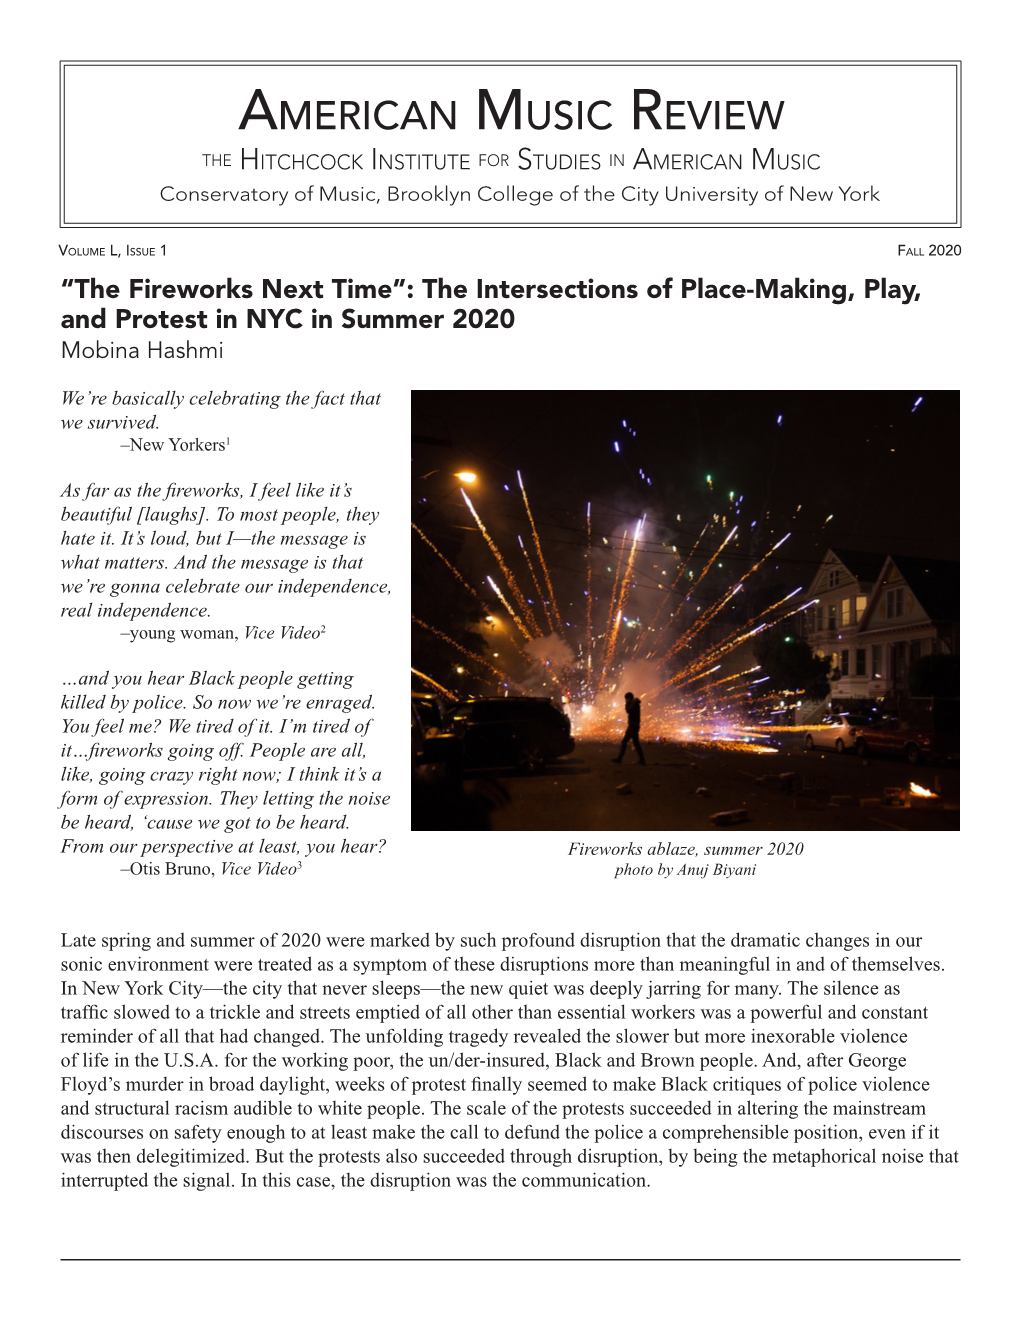 “The Fireworks Next Time”: the Intersections of Place-Making, Play, and Protest in NYC in Summer 2020 Mobina Hashmi